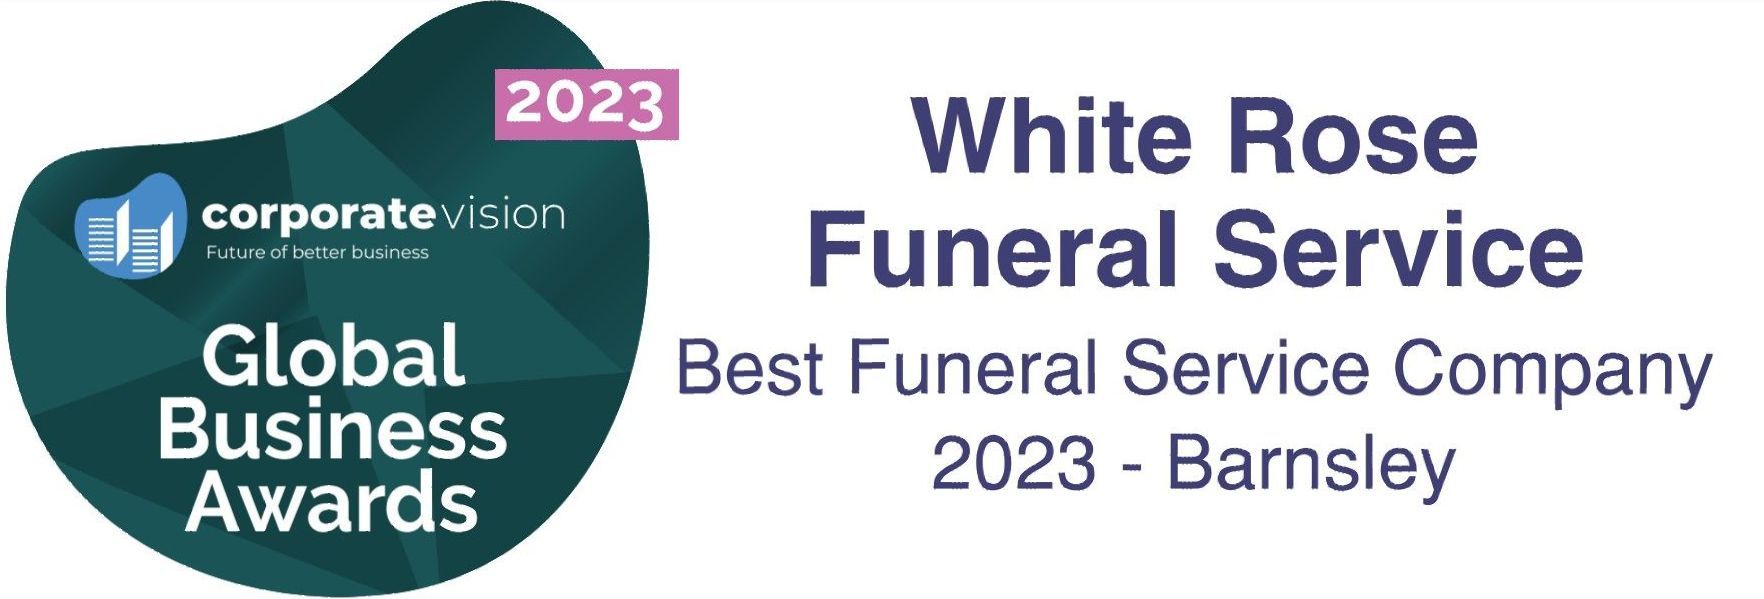 The white rose funeral service is a winner of the global business awards